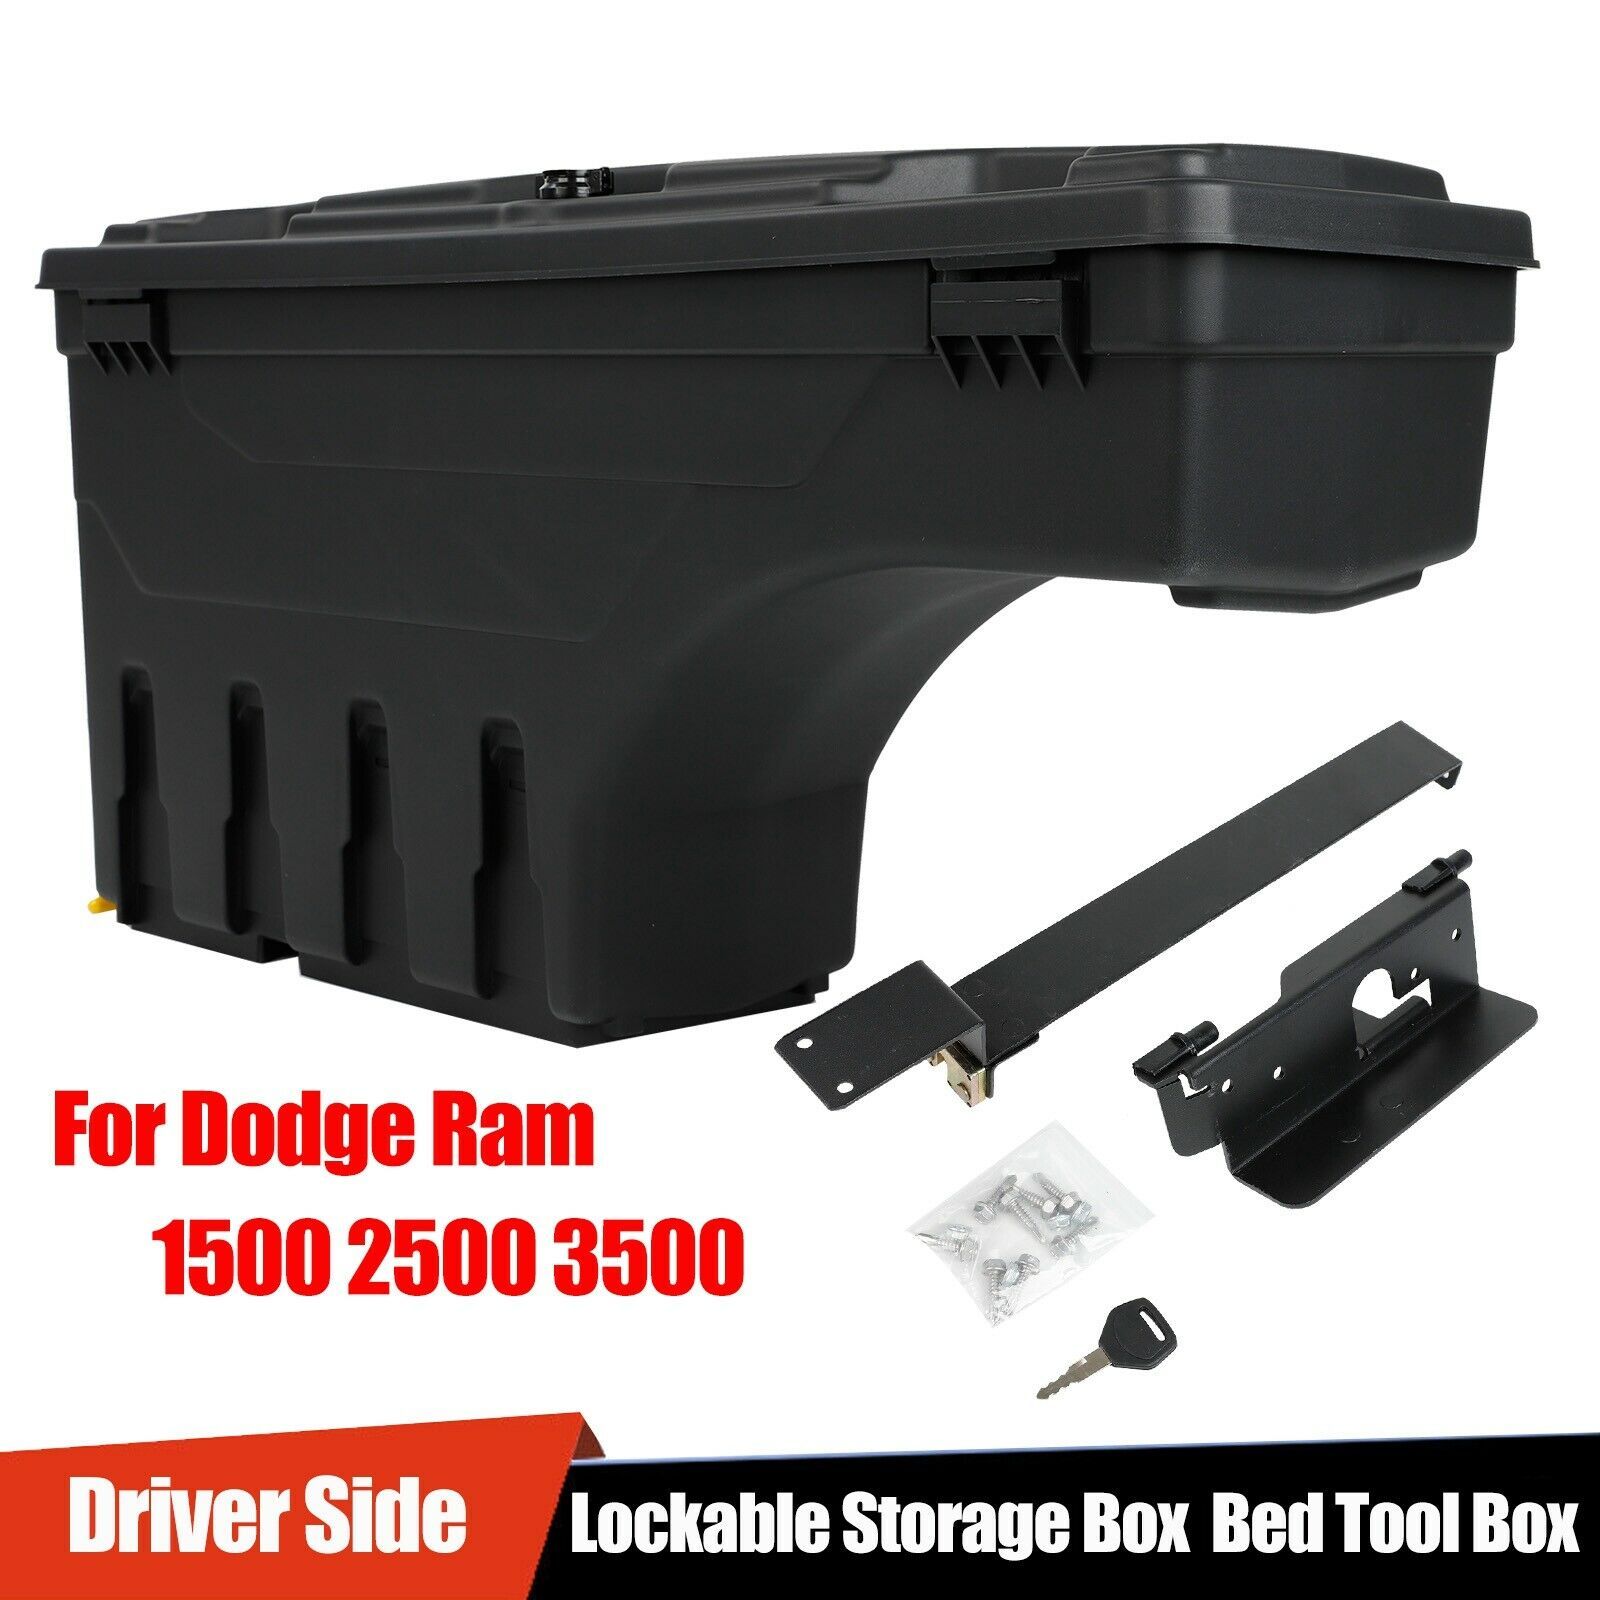 Lockable Storage Box Truck Bed Tool Box Driver Side For Dodge Ram 1500 2500 3500